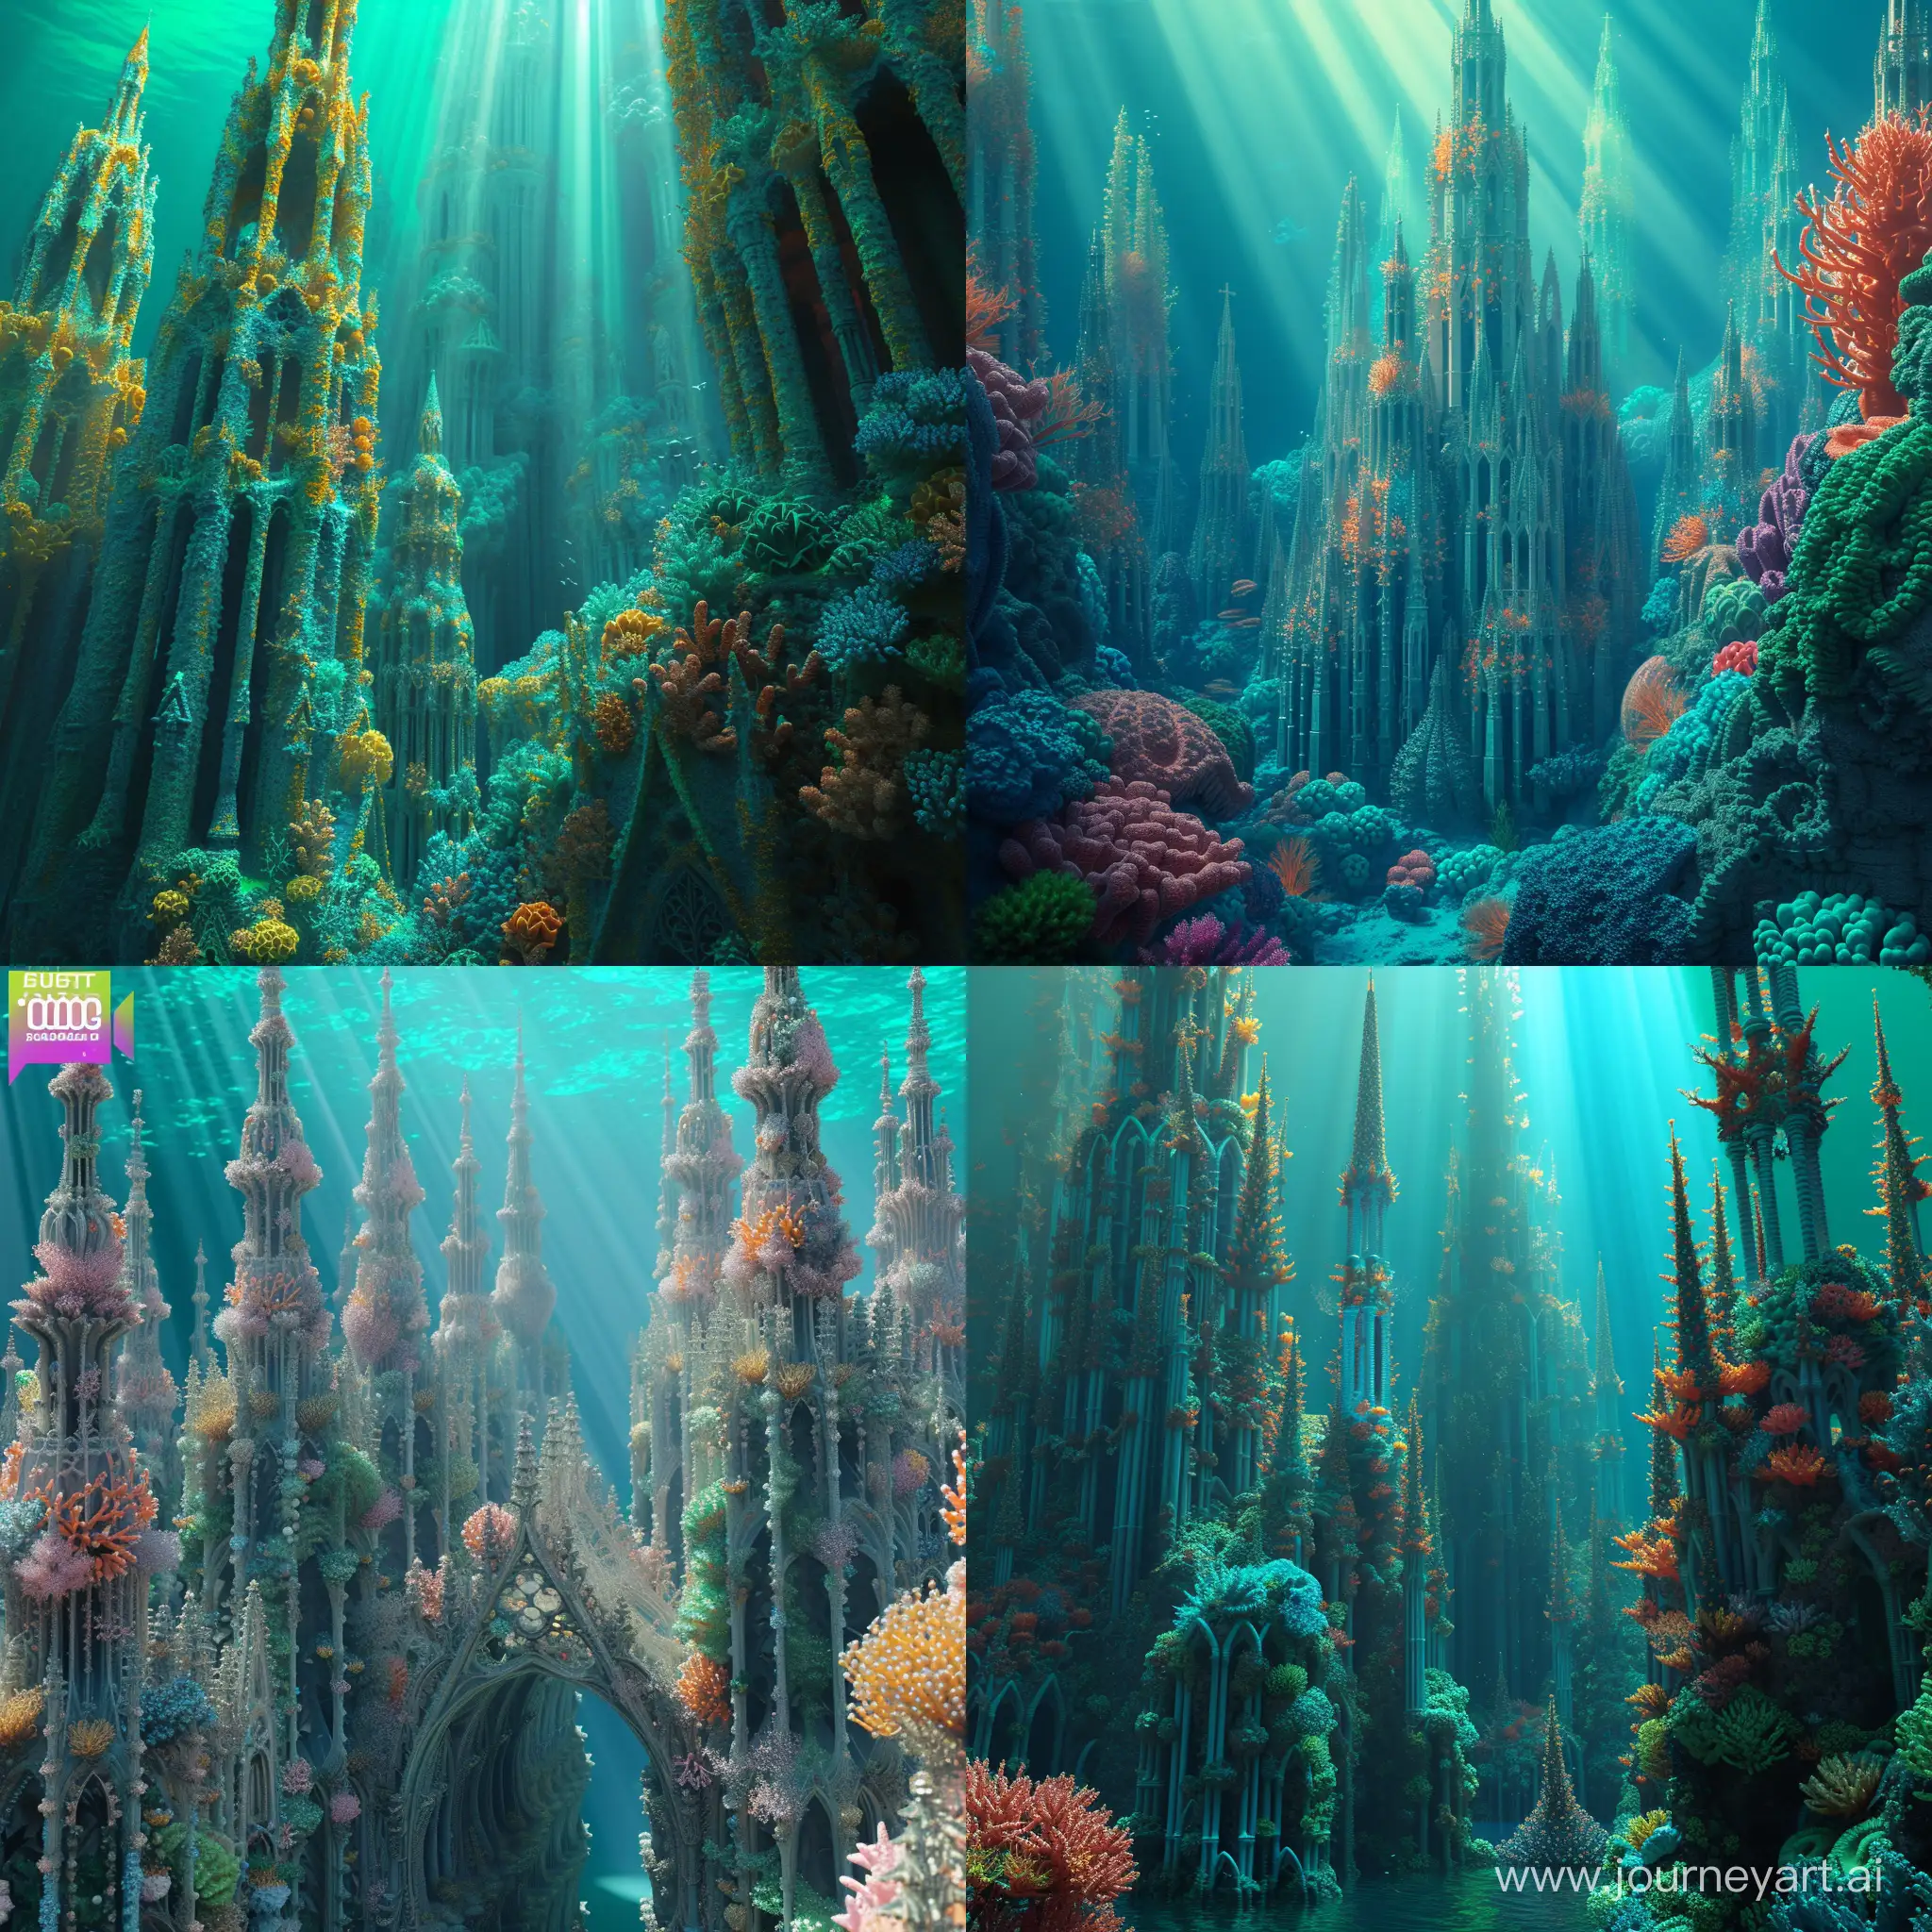 Submerged-Coral-Cathedral-Surreal-Gothic-Architecture-Beneath-the-Sea